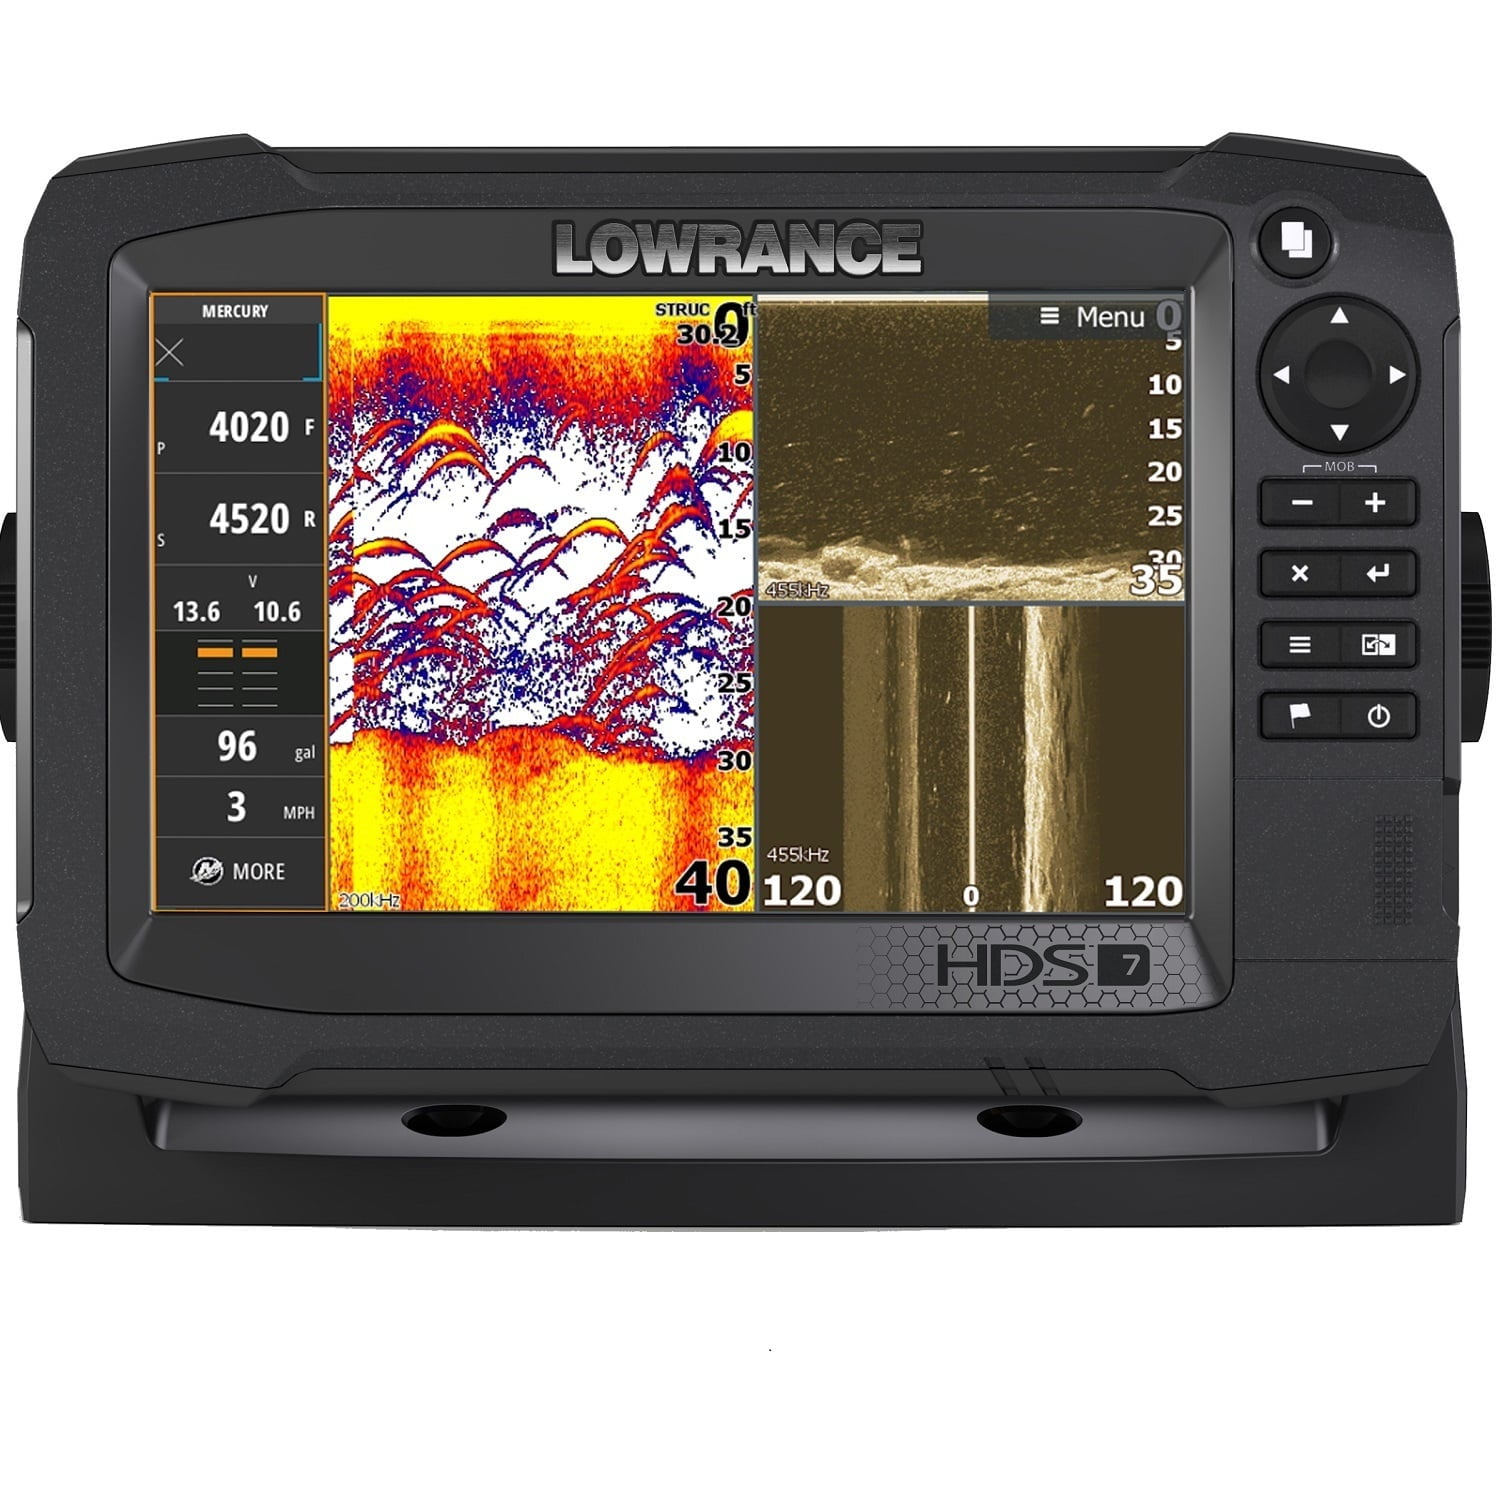 Lowrance HDS Carbon 7 Fishfinder & Chartplotter with TotalScan Transducer,  CHIRP Sonar, SideScan Imaging, DownScan Imaging & 7